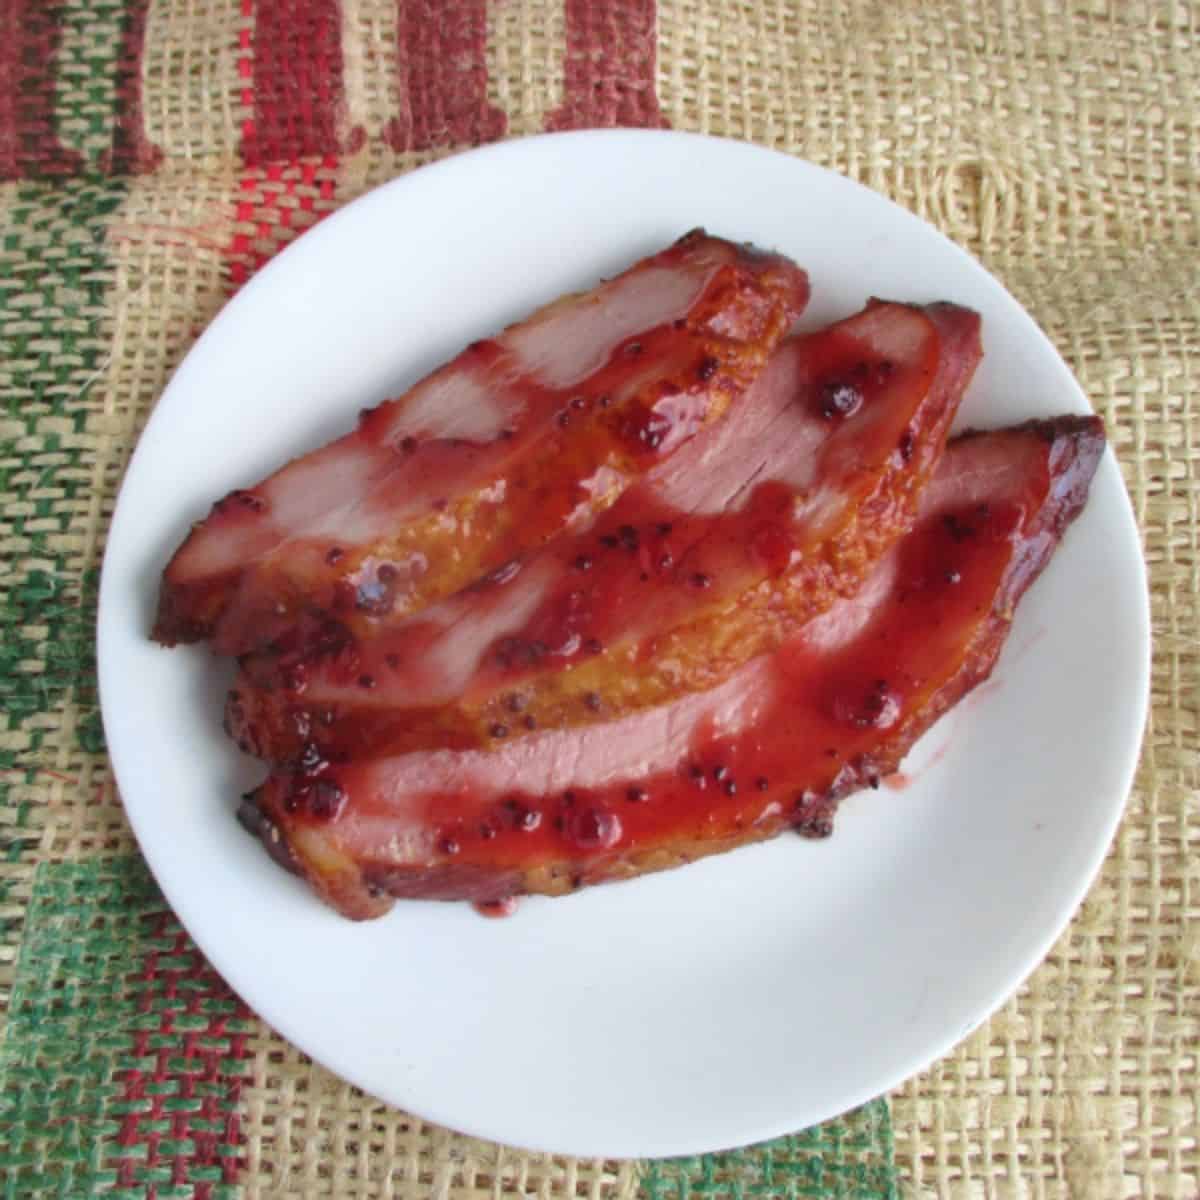 Slices of Kirkland Master Carve ham  on a white plate with homemade red currant glaze on top. The plate is sitting on a piece of burlap.